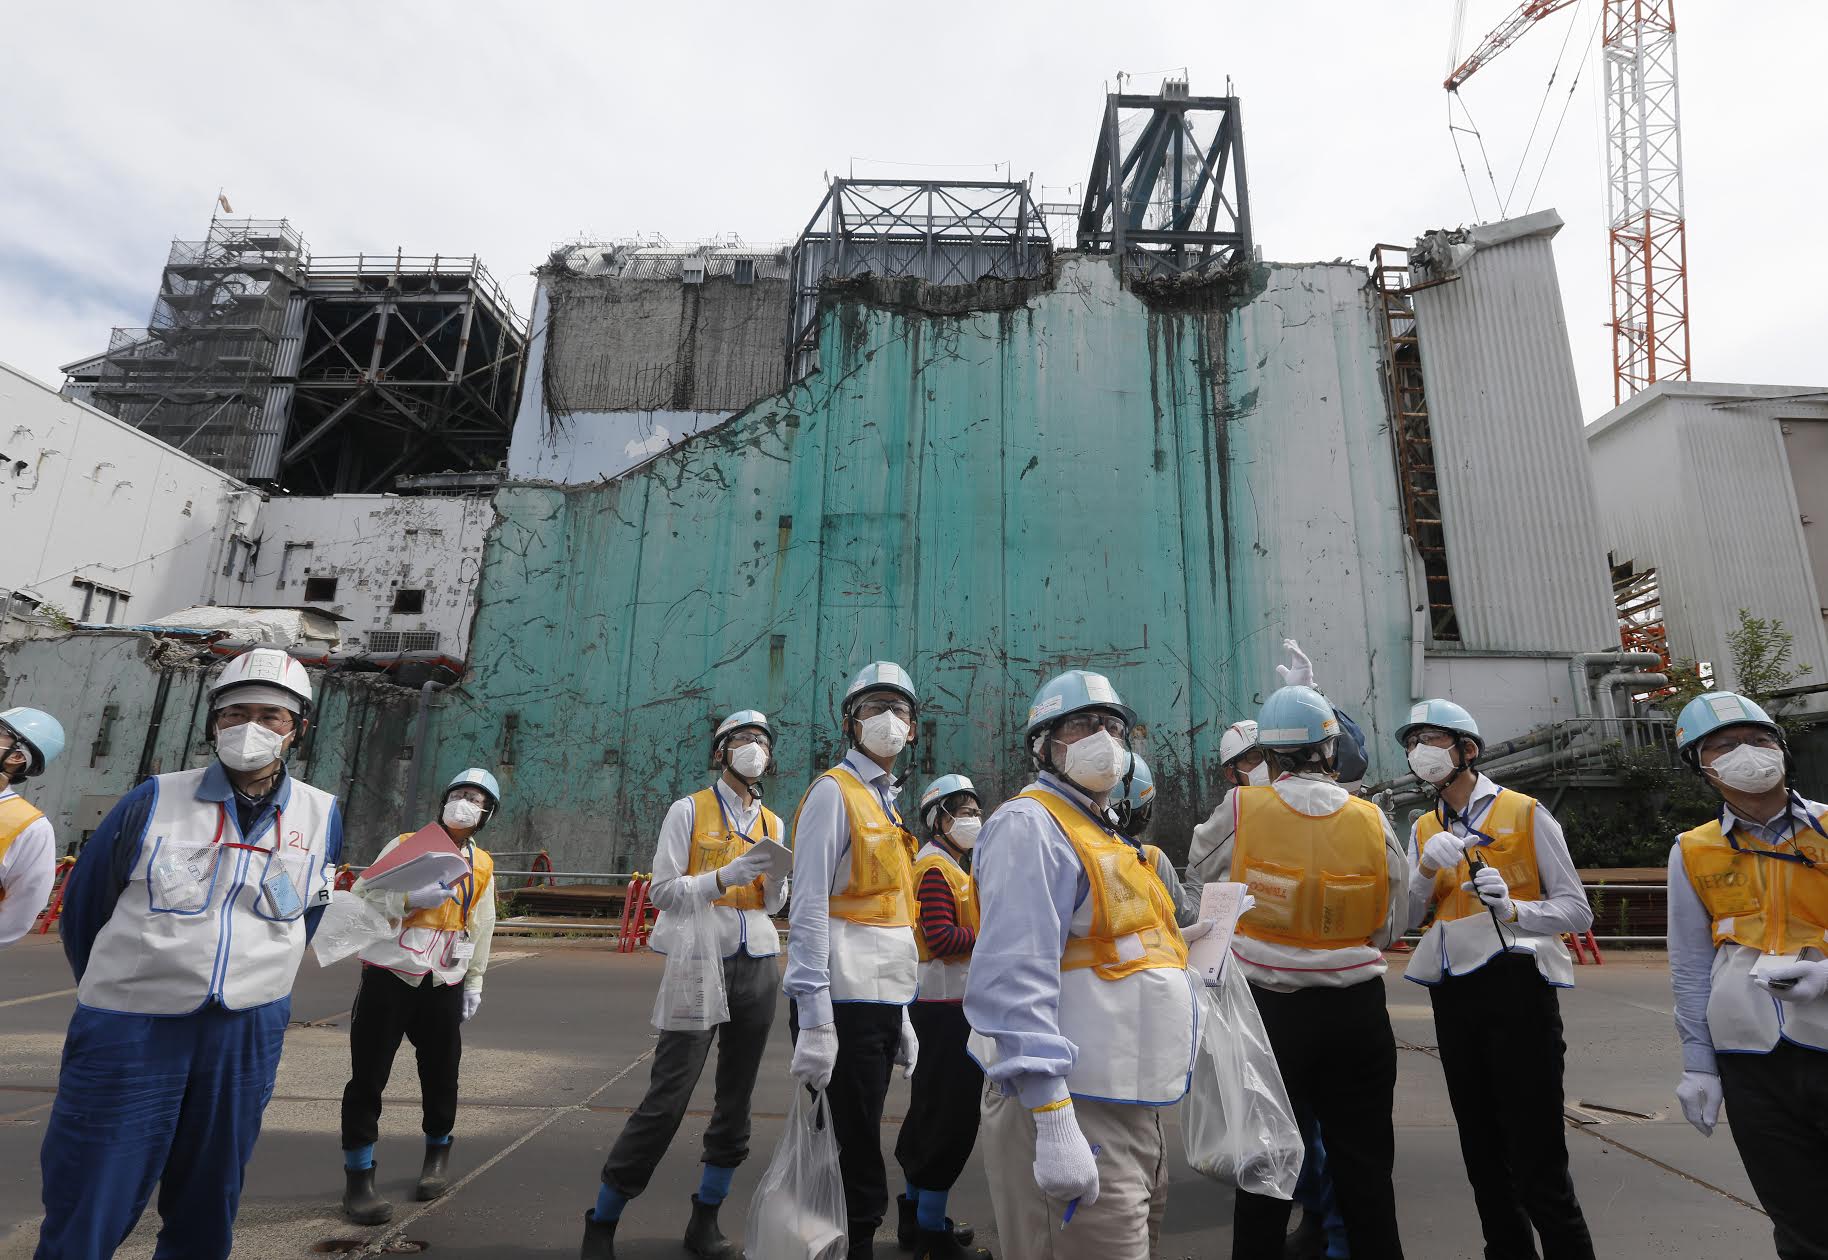 A large group of people wearing safety equipment and breathing masks stands in front of the remains of the destroyed Fukushima nuclear plant in Japan